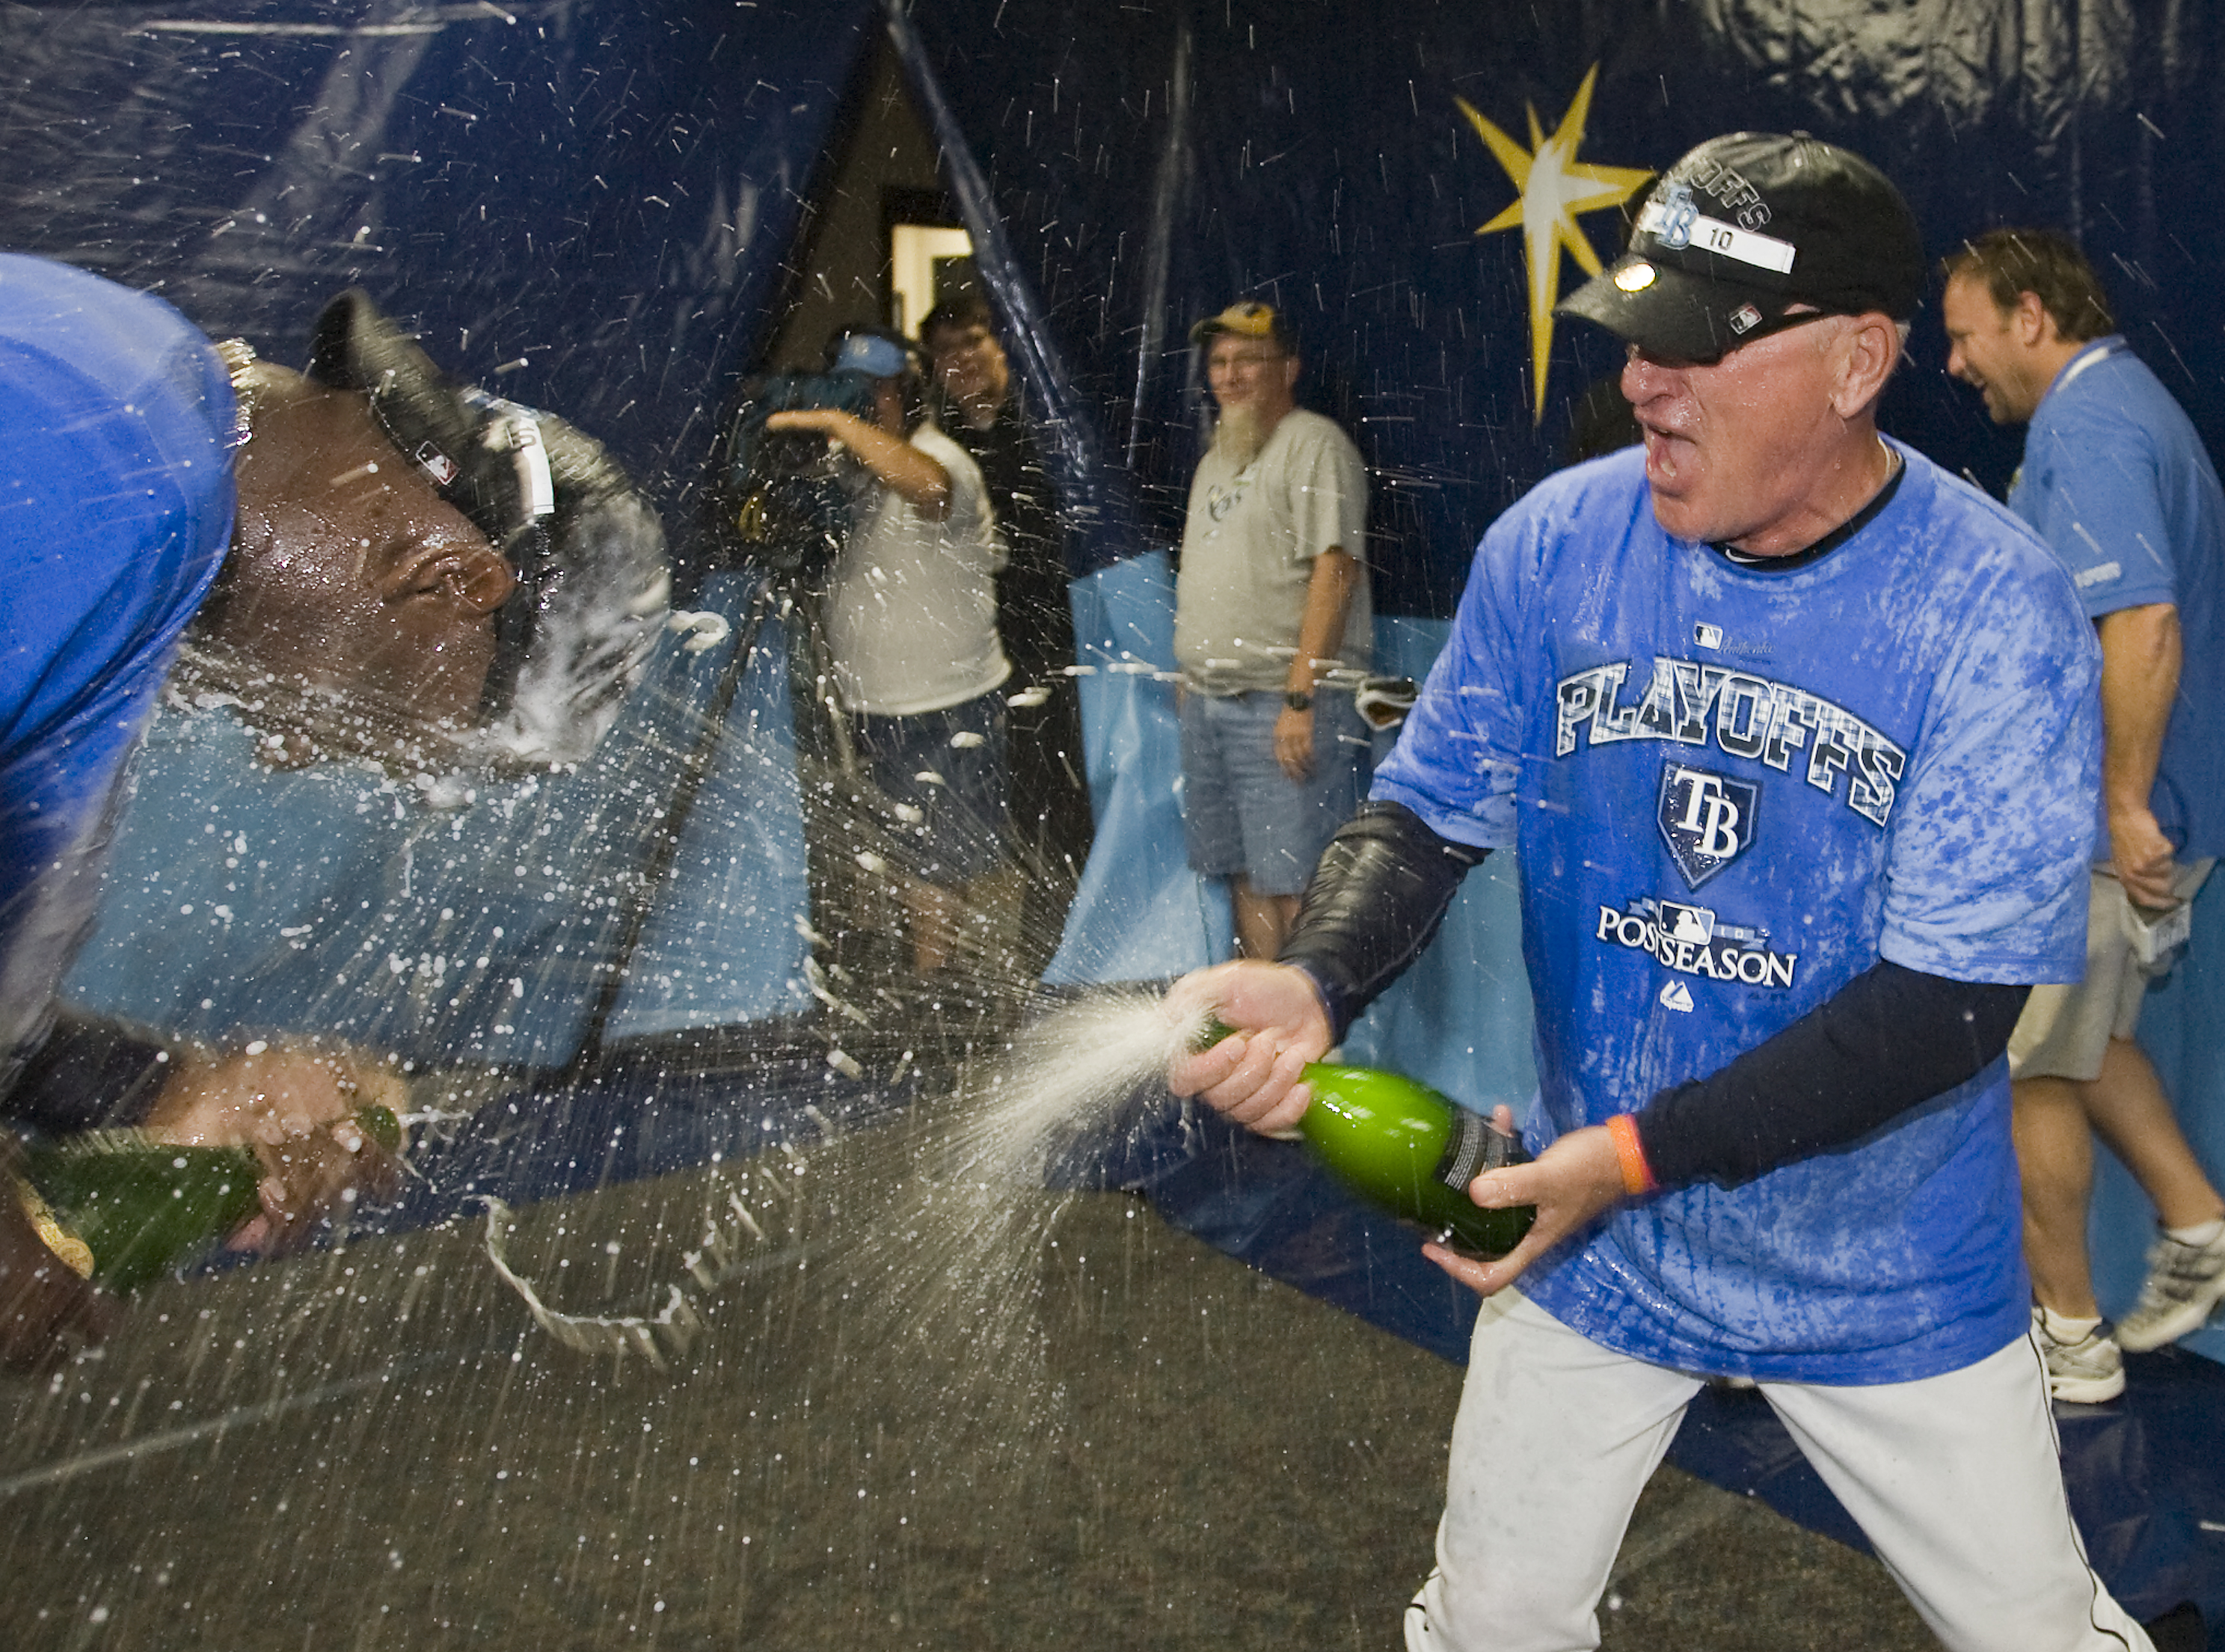 Joe Maddon on Rays' sustained success, a new Tampa stadium and more